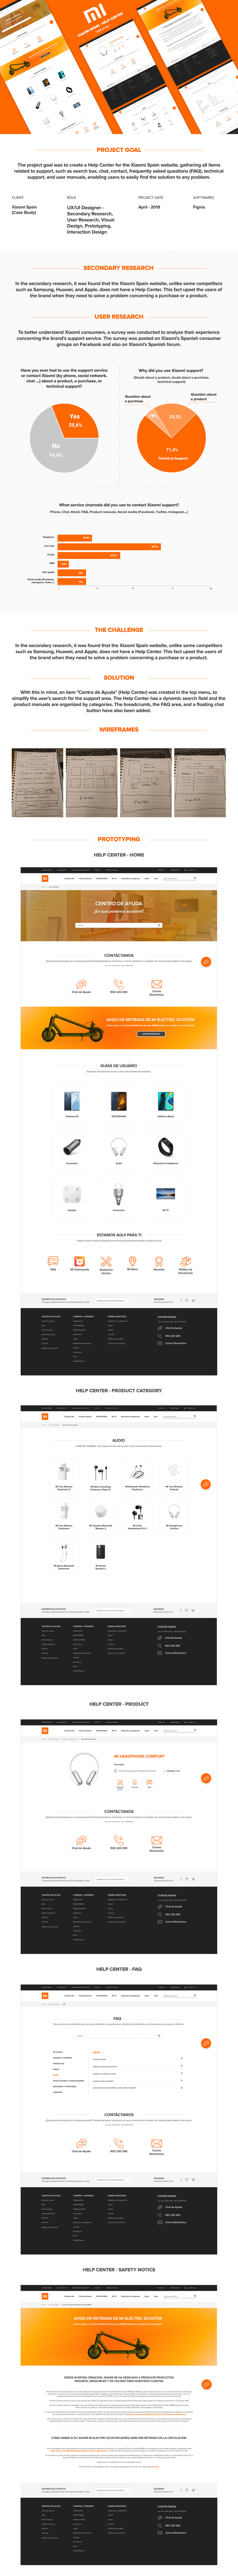 The project goal was to create a Help Center for the Xiaomi Spain website